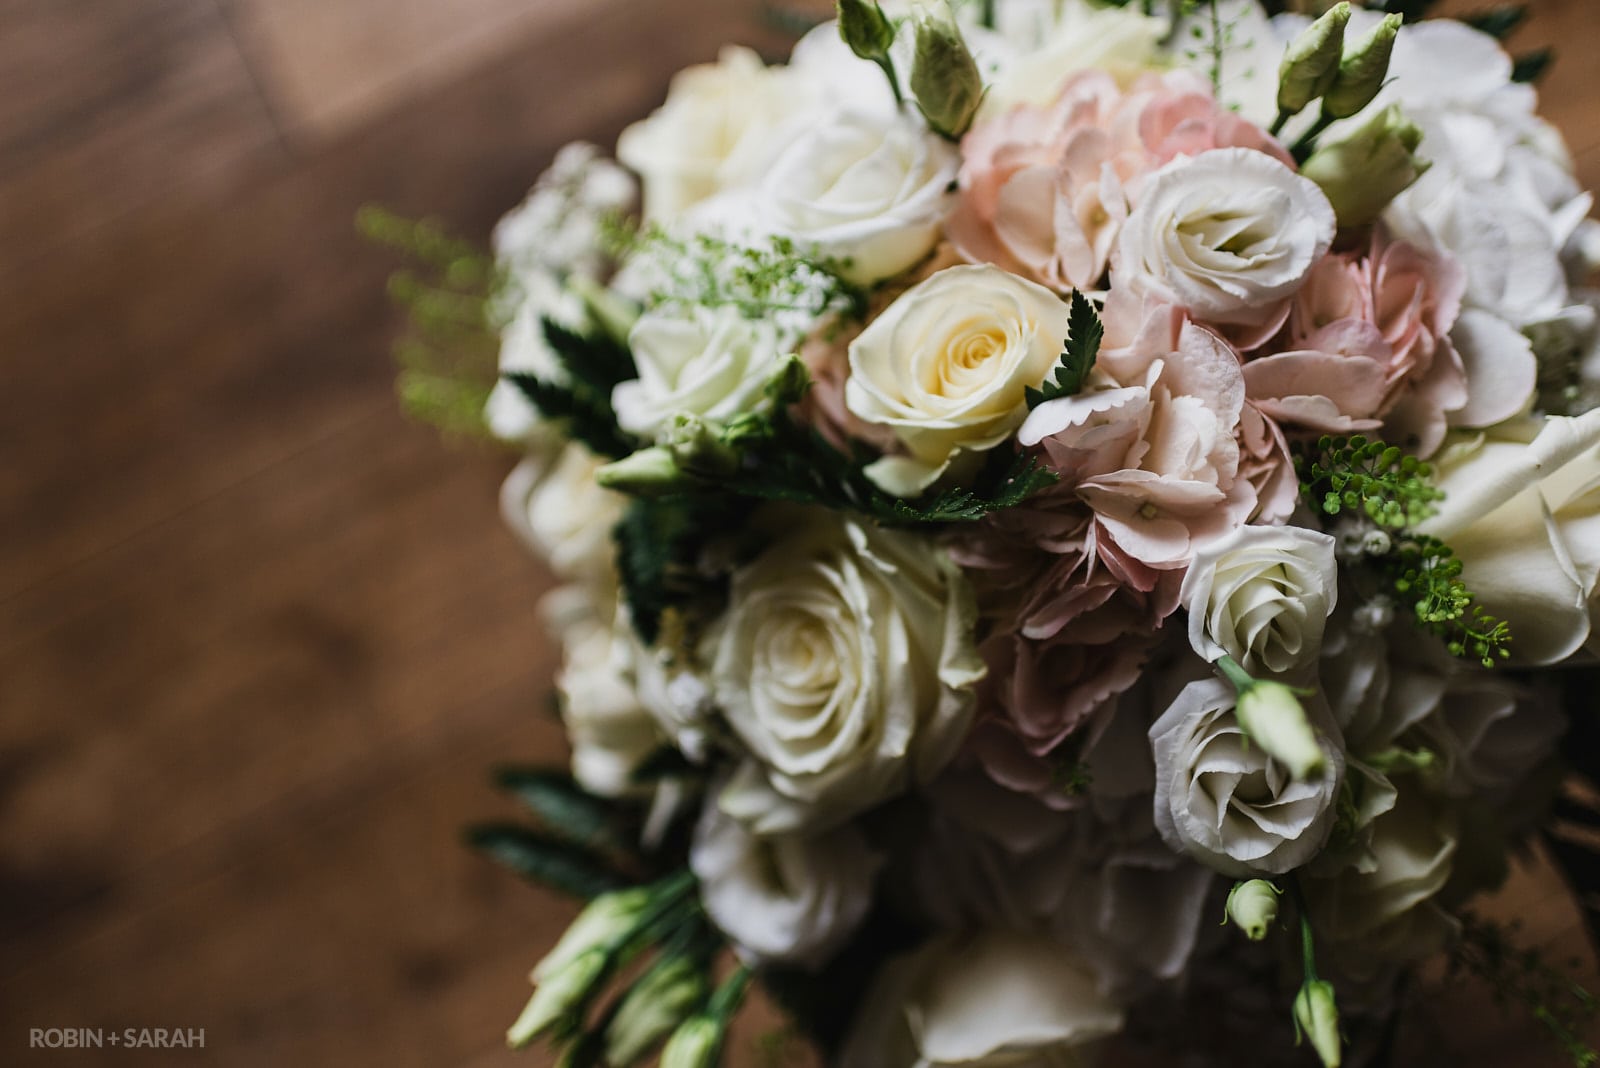 Bridal bouquet with pink, white and ivory flowers